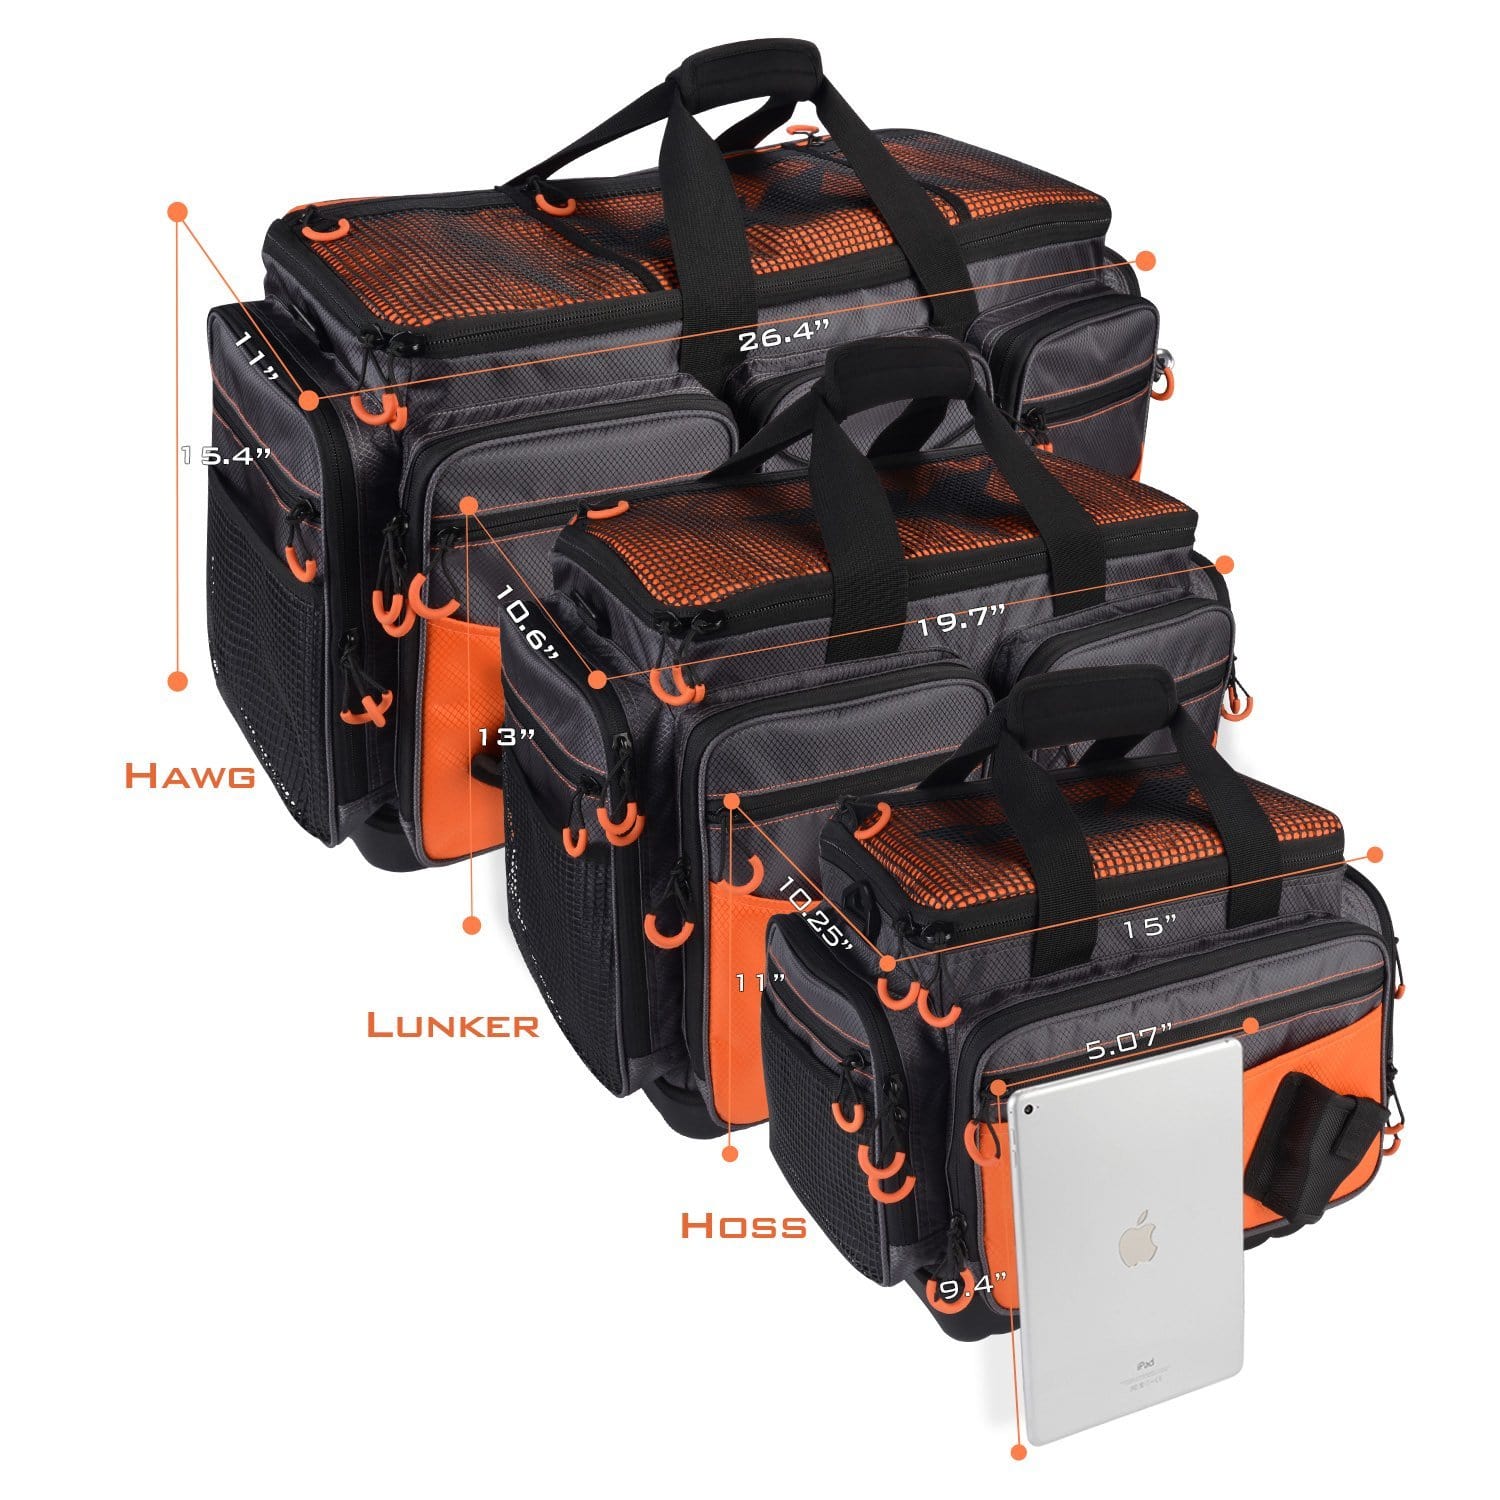 KastKing Fishing Tackle Bags,Extra-Large Hawg (Without Trays, 26.4x11x15.4  Inches) (Color: C: Extra-large Hawg (Without Trays, 26.4x11x15.4))